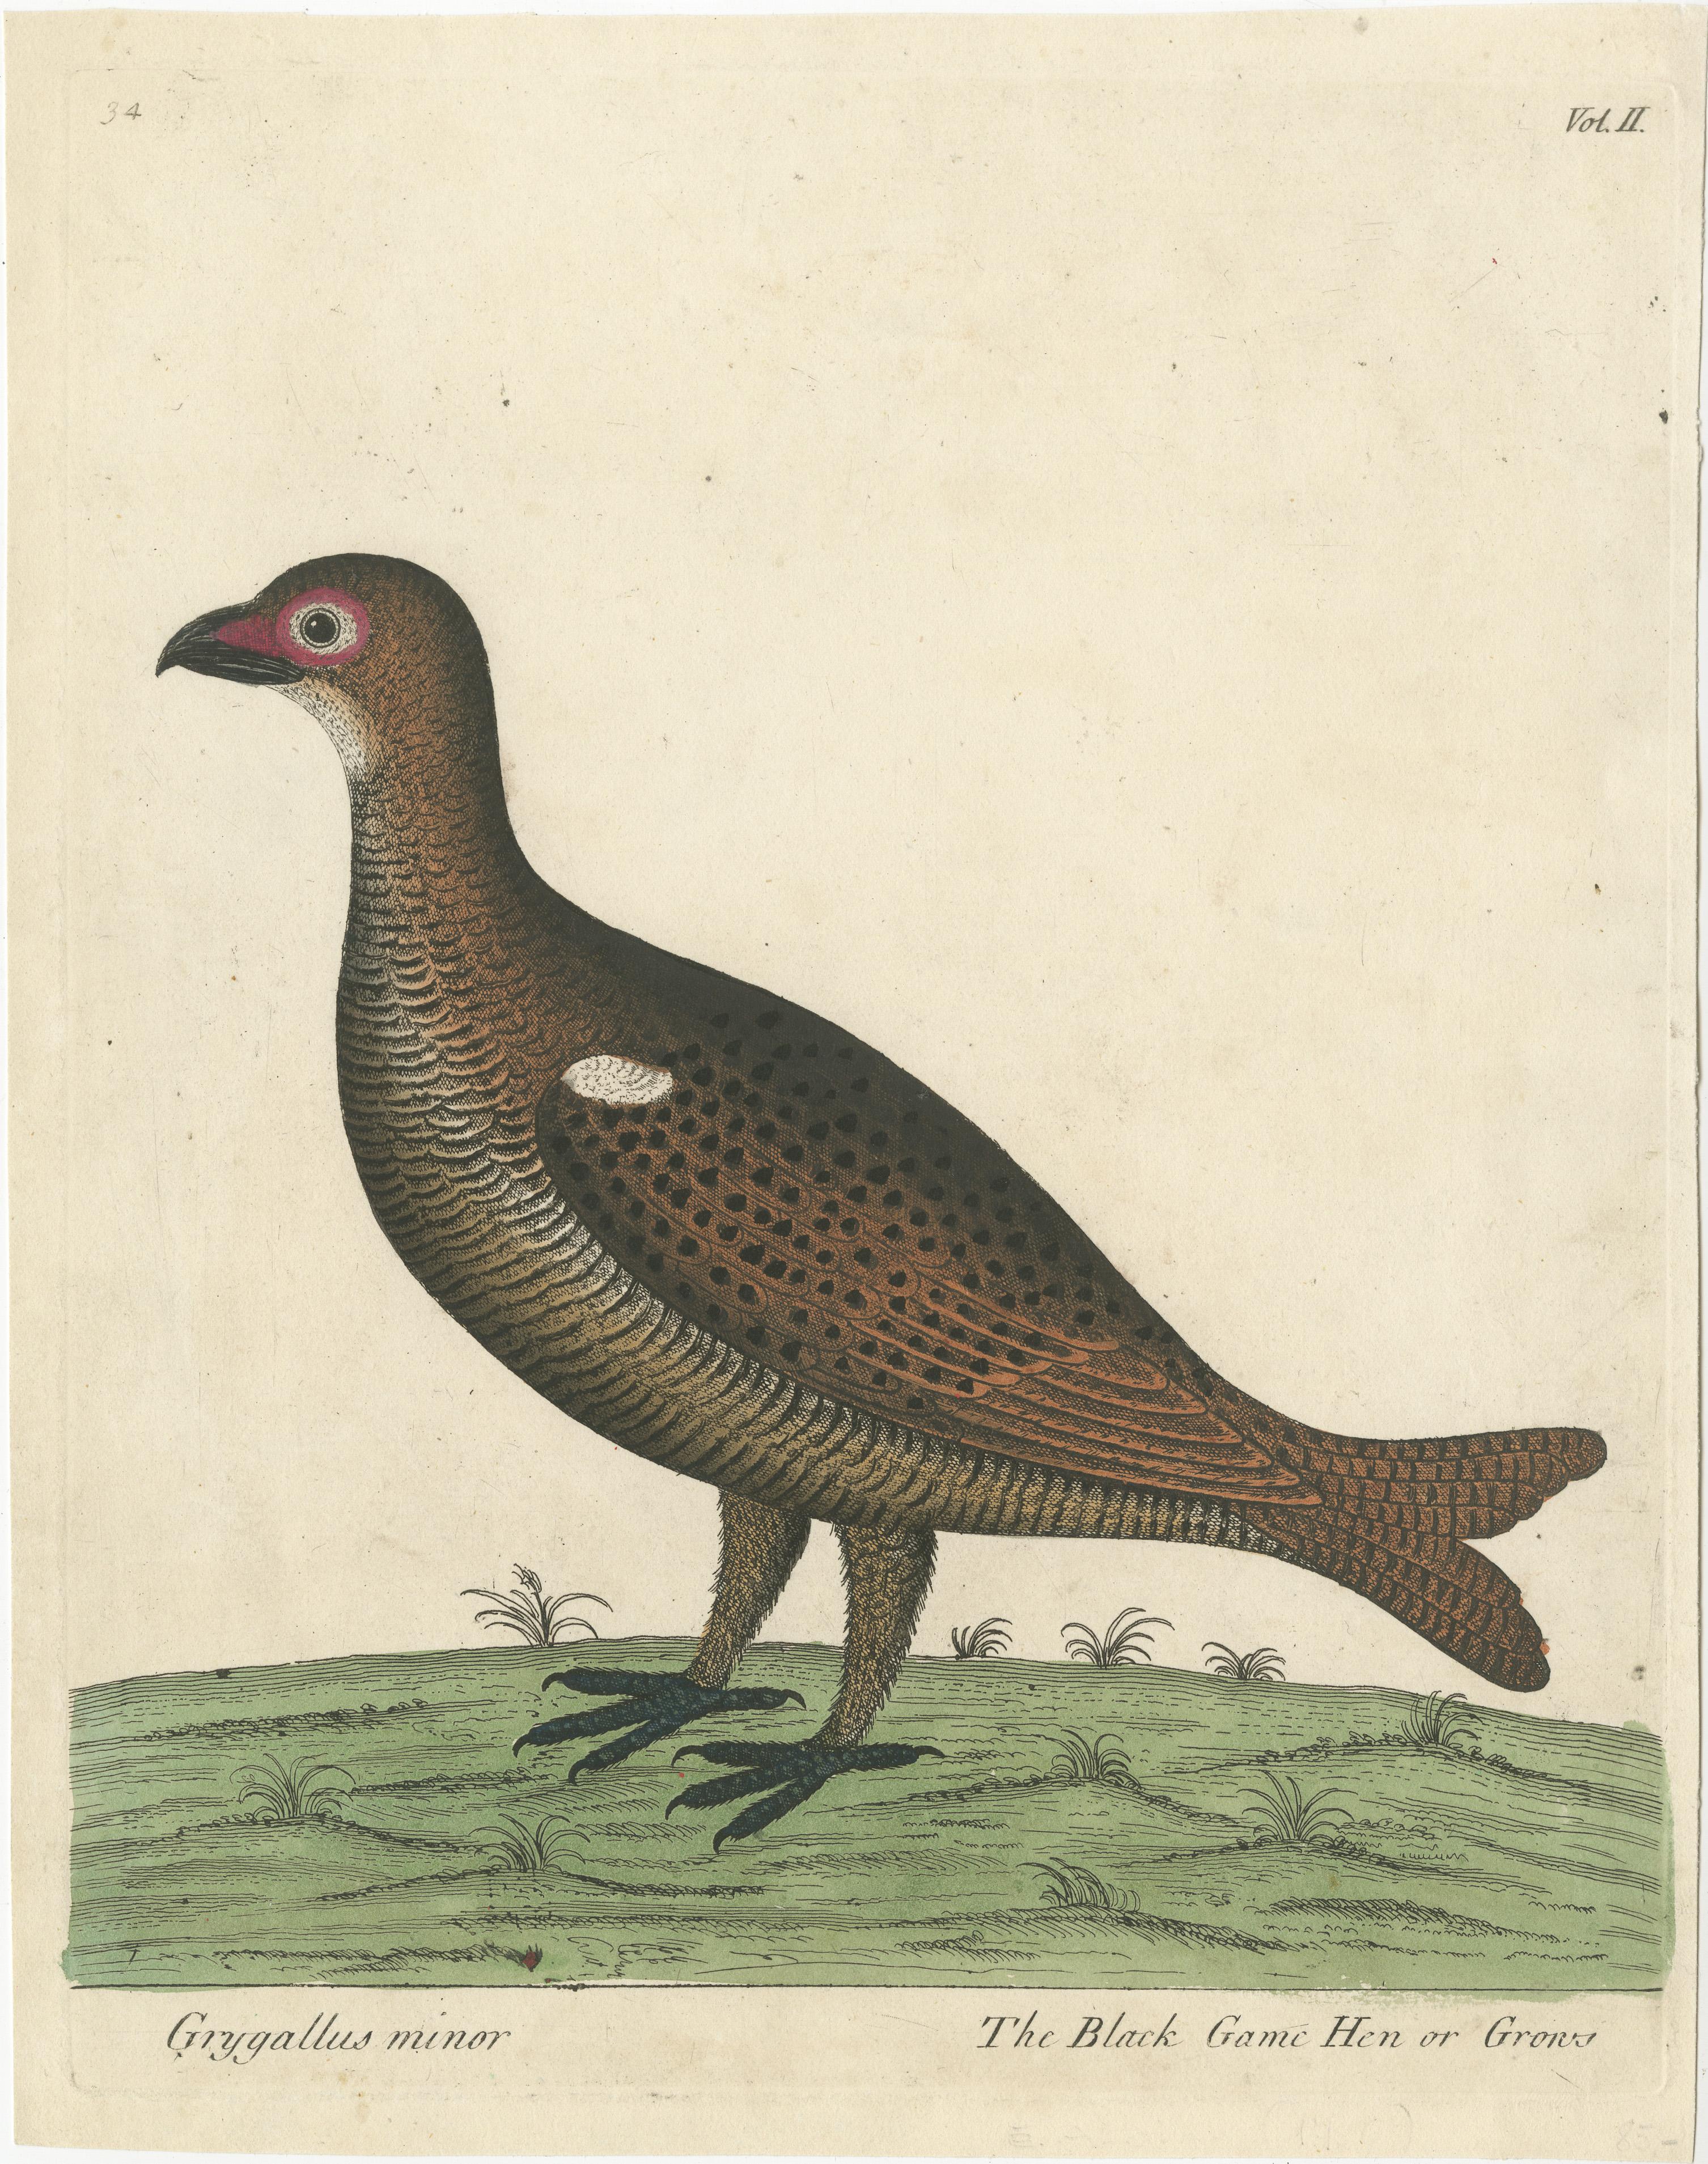 Hand colored print titled 'Grygallus minor - The Black Game Hen or Grows'. Beautiful print of a black game hen or grouse. This print originates from 'A Natural History of Birds: Illustrated with two hundred and five copper plates, curiously engraven